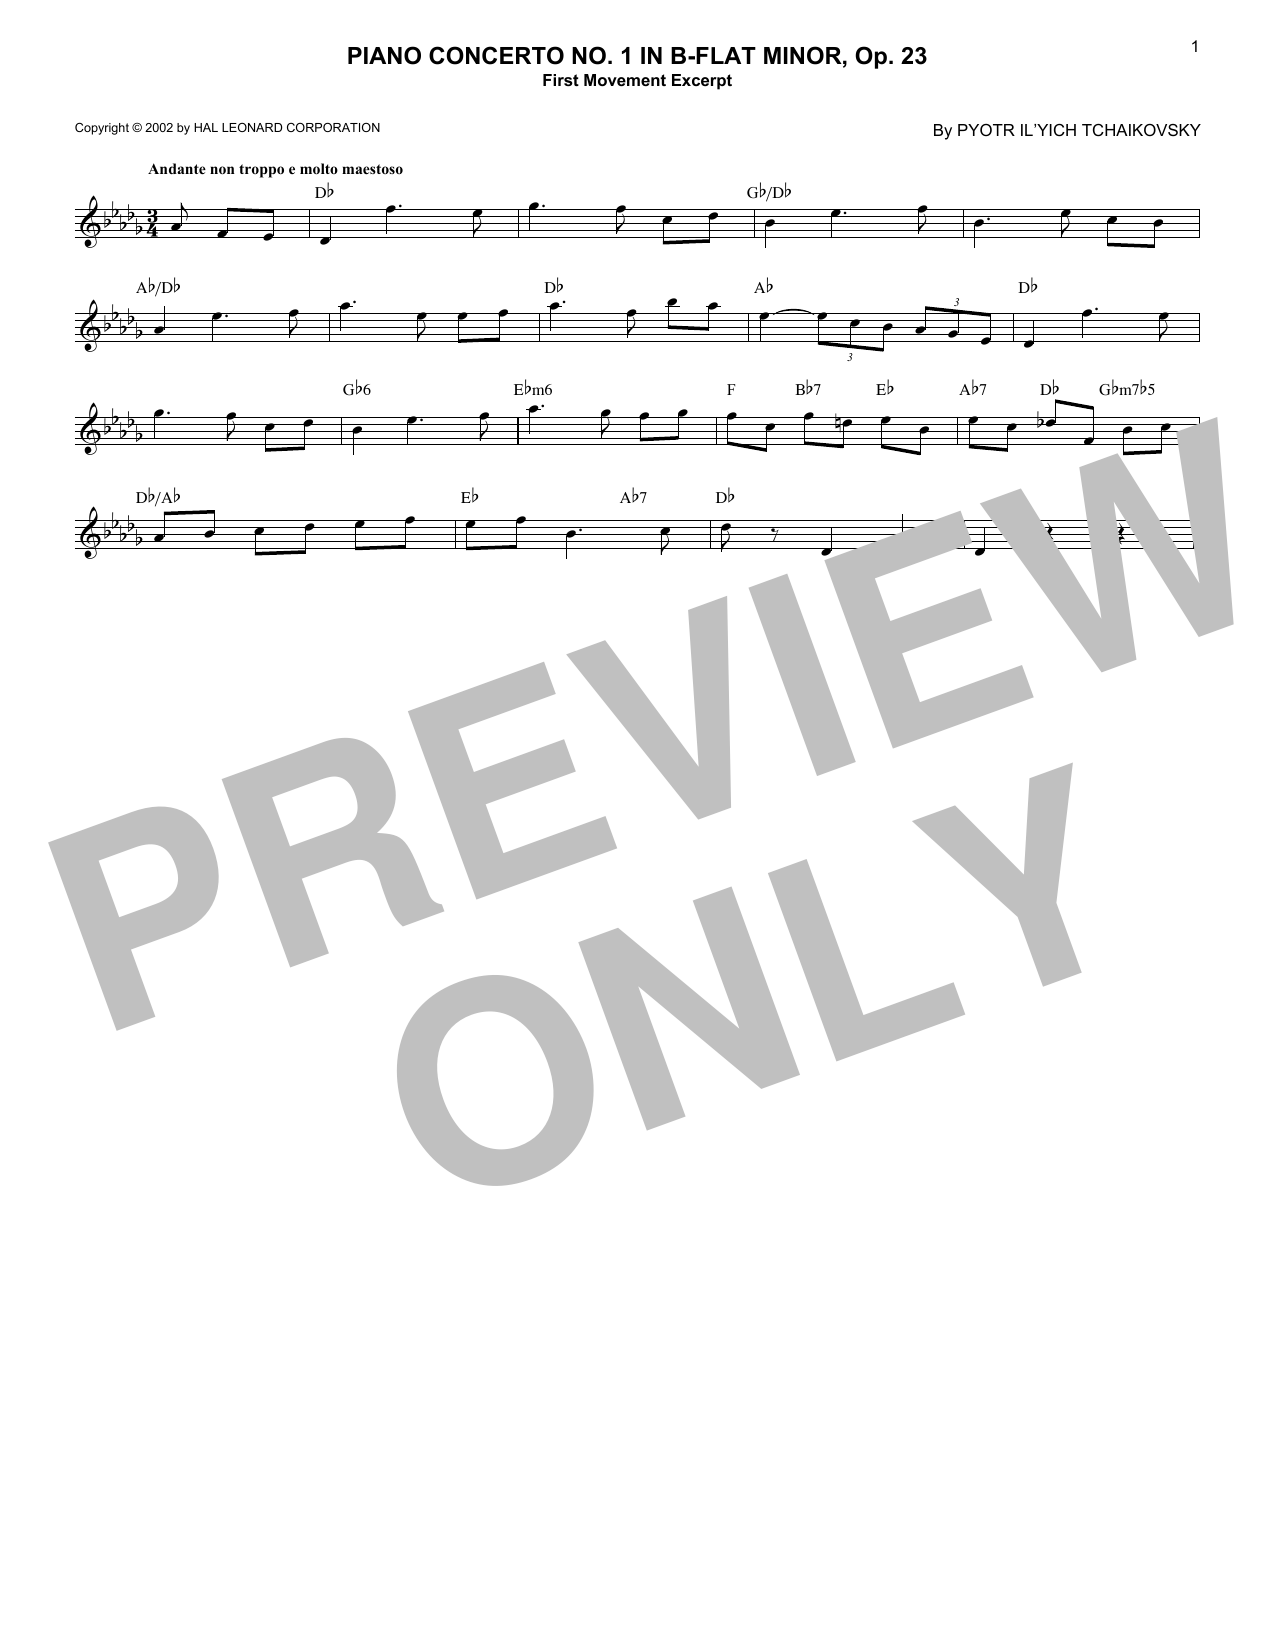 Pyotr Il'yich Tchaikovsky Piano Concerto No. 1 In B-Flat Minor, Op. 23, First Movement Excerpt sheet music notes printable PDF score